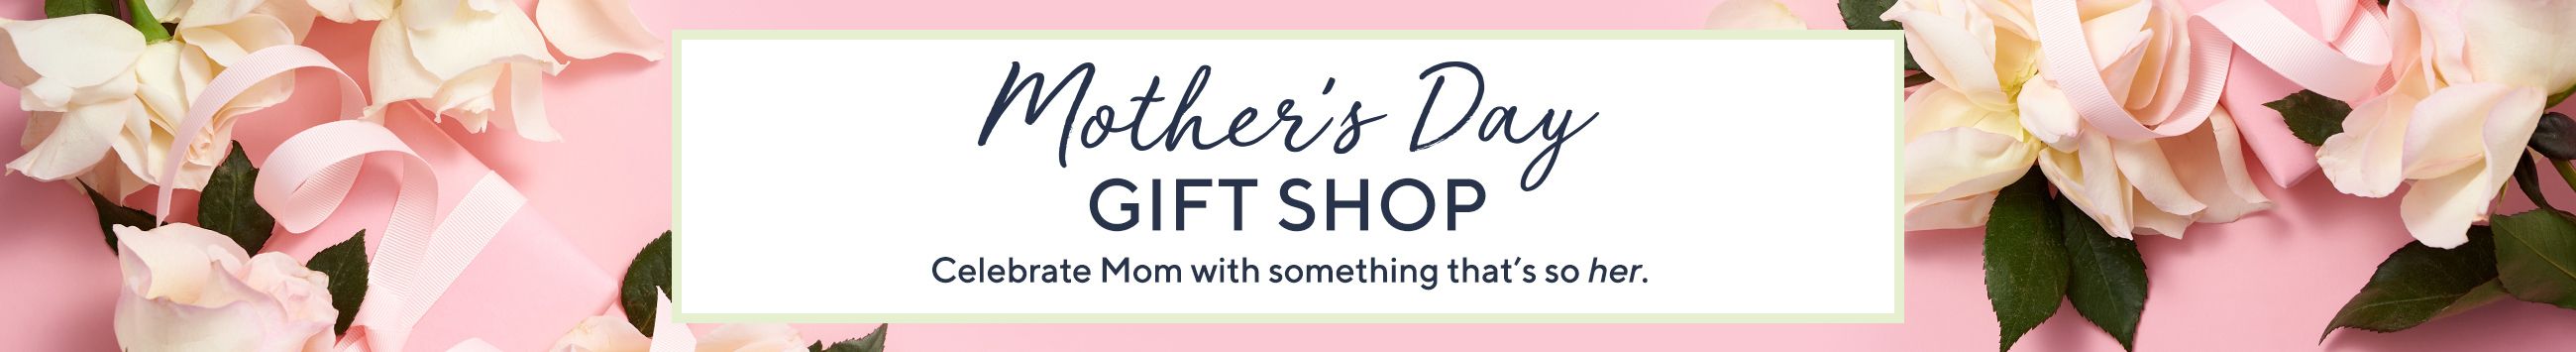 Mother's Day Gift Shop.  Celebrate Mom with unique Mother's Day gifts.